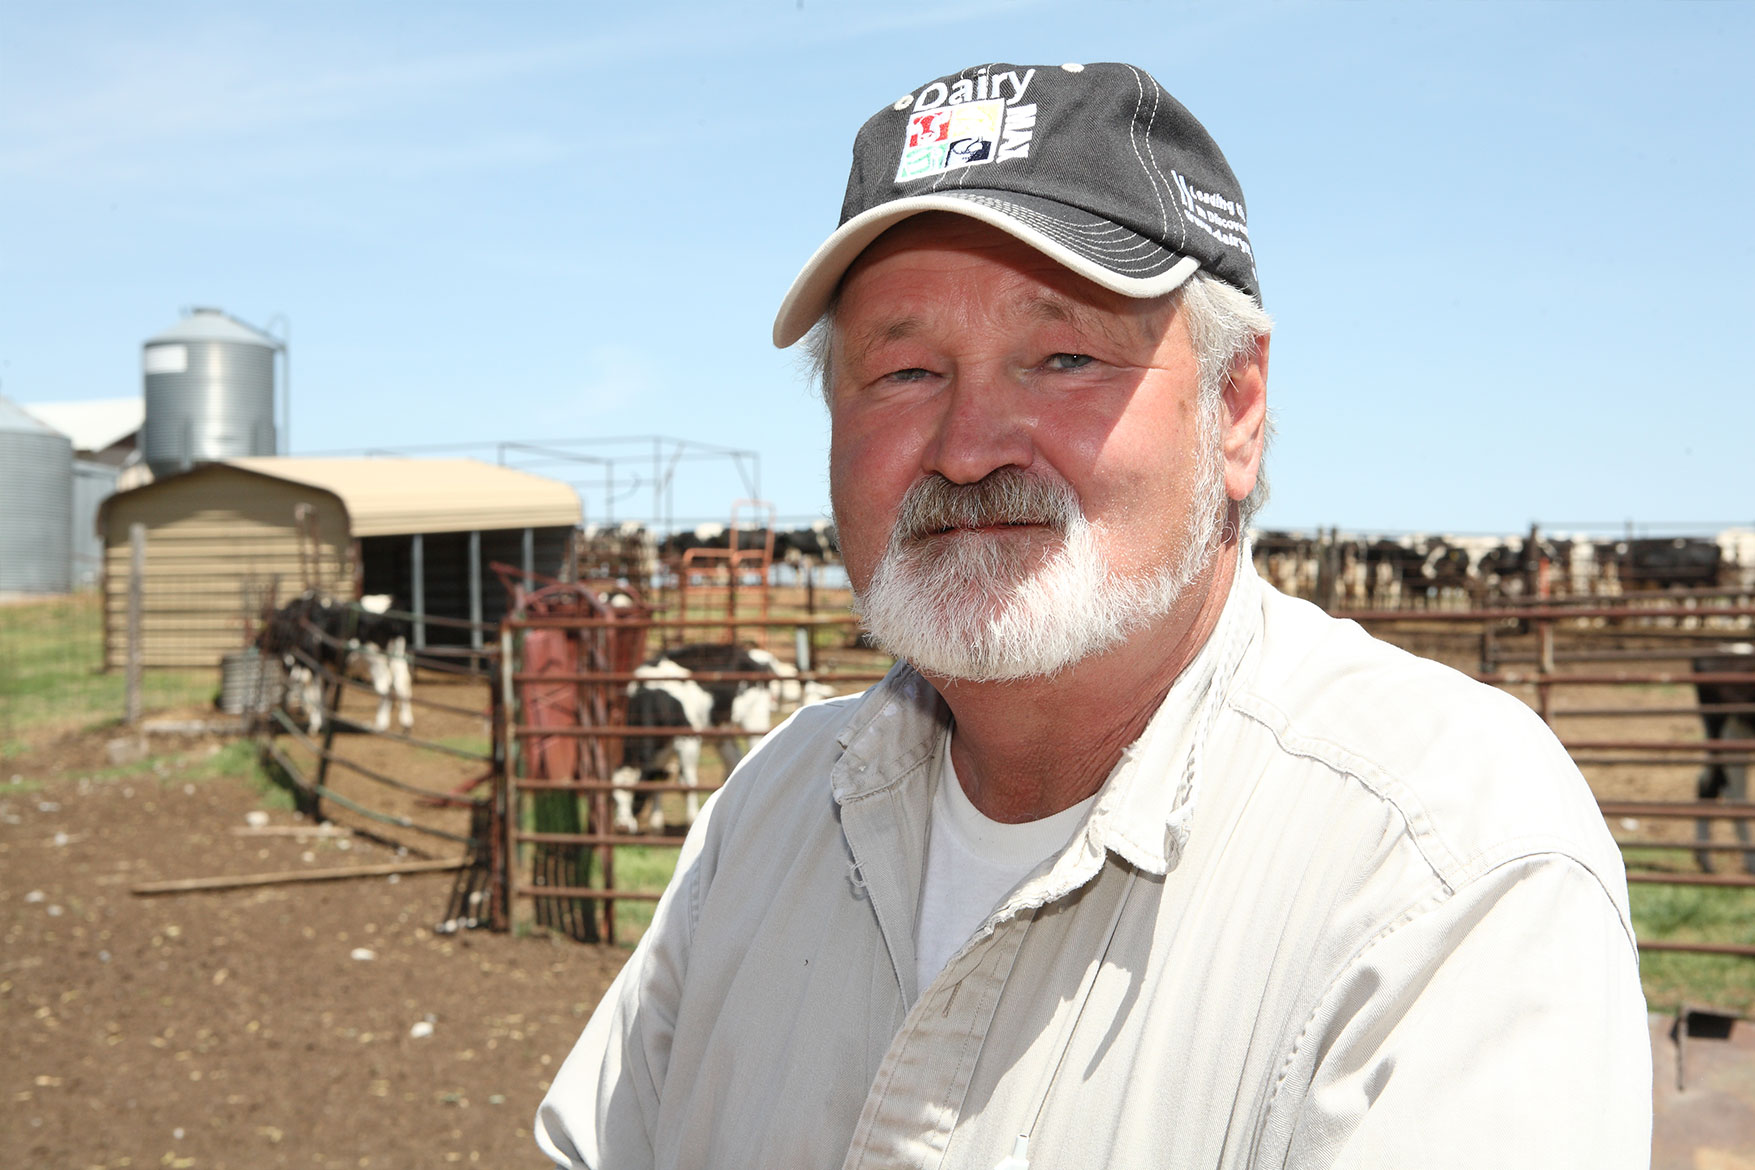 Donny Chapman poses for a photo in front of his dairy farm.